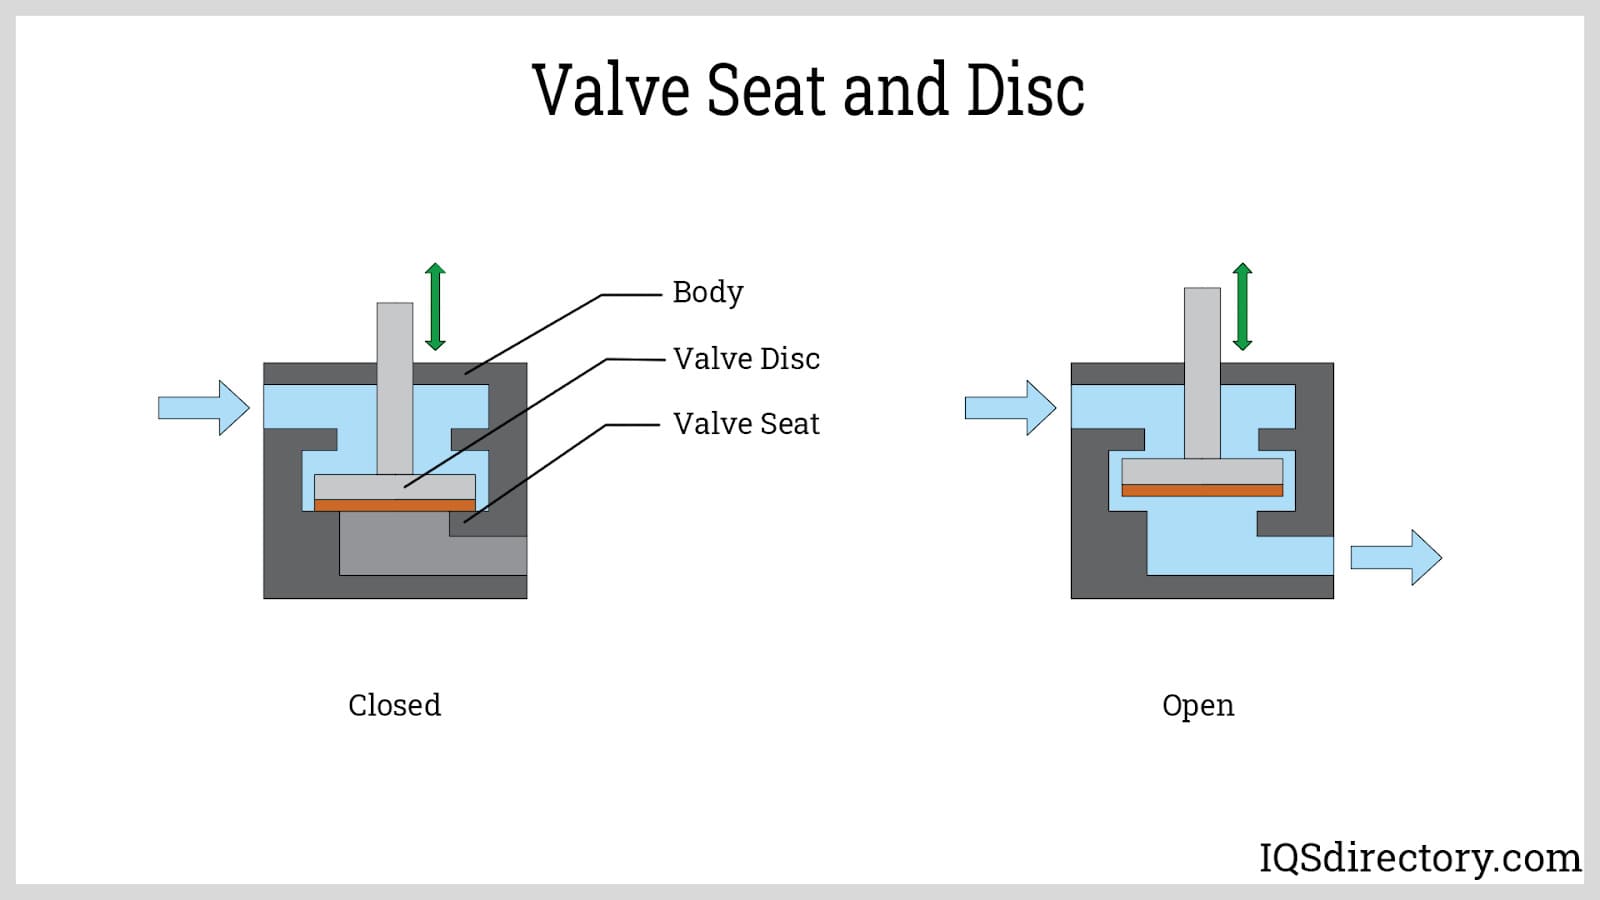 Valve Seat and Disc